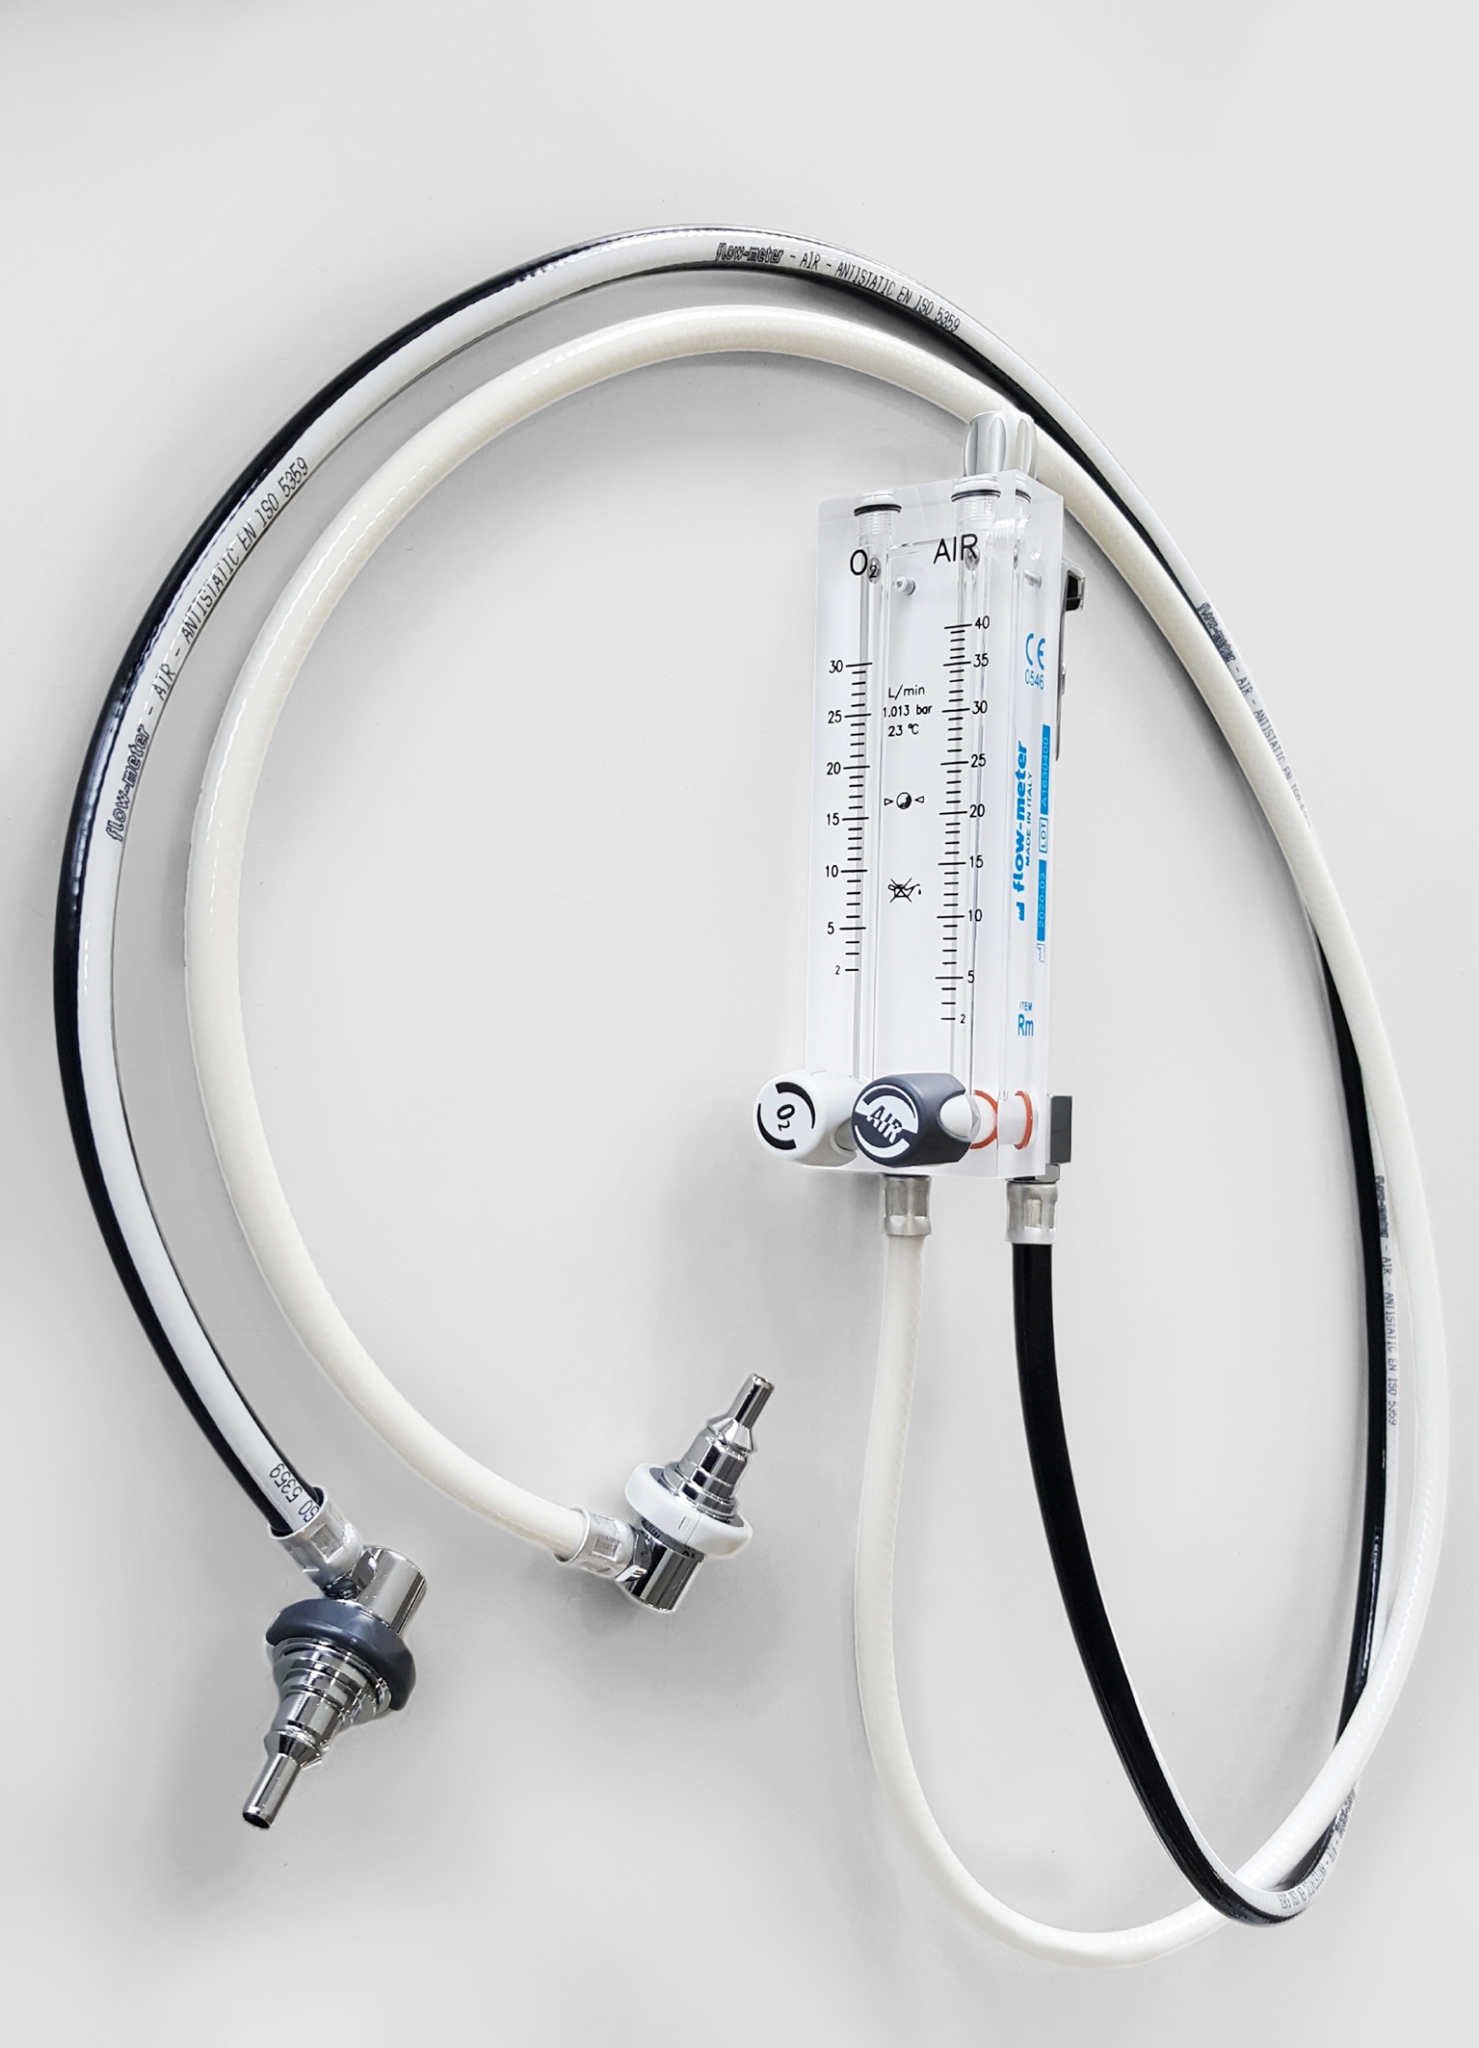 Continental producing medical hoses in Italy